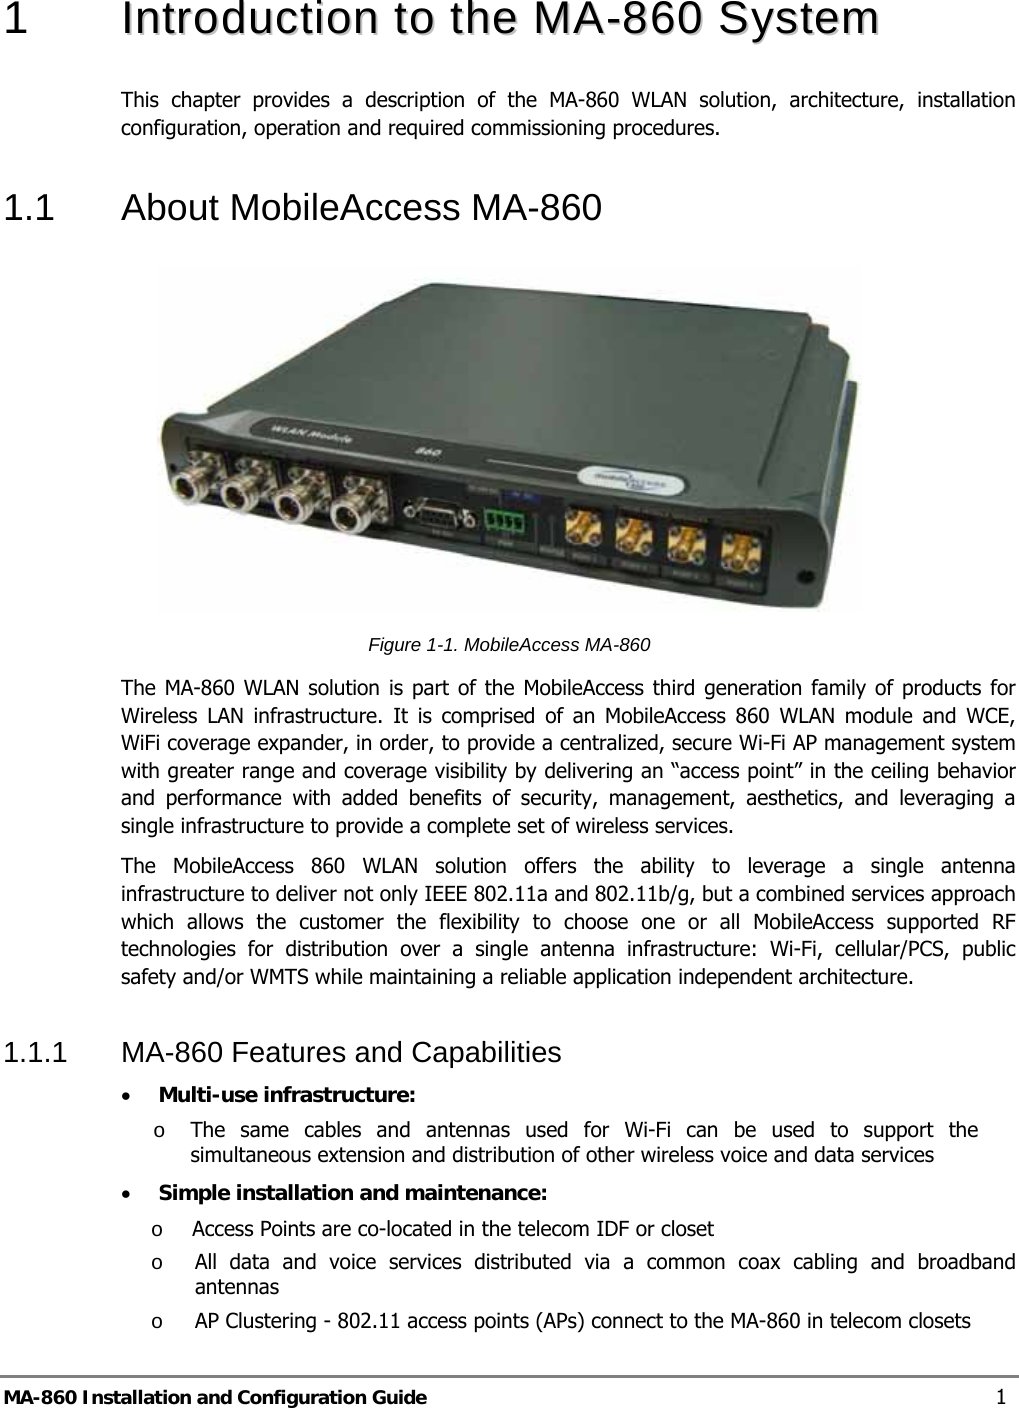  1   IInnttrroodduuccttiioonn  ttoo  tthhee  MMAA--886600  SSyysstteemm  This chapter provides a description of the MA-860 WLAN solution, architecture, installation configuration, operation and required commissioning procedures. 1.1  About MobileAccess MA-860  Figure  1-1. MobileAccess MA-860  The MA-860 WLAN solution is part of the MobileAccess third generation family of products for Wireless LAN infrastructure. It is comprised of an MobileAccess 860 WLAN module and WCE, WiFi coverage expander, in order, to provide a centralized, secure Wi-Fi AP management system with greater range and coverage visibility by delivering an “access point” in the ceiling behavior and performance with added benefits of security, management, aesthetics, and leveraging a single infrastructure to provide a complete set of wireless services. The MobileAccess 860 WLAN solution offers the ability to leverage a single antenna infrastructure to deliver not only IEEE 802.11a and 802.11b/g, but a combined services approach which allows the customer the flexibility to choose one or all MobileAccess supported RF technologies for distribution over a single antenna infrastructure: Wi-Fi, cellular/PCS, public safety and/or WMTS while maintaining a reliable application independent architecture. 1.1.1  MA-860 Features and Capabilities • Multi-use infrastructure: o The same cables and antennas used for Wi-Fi can be used to support the simultaneous extension and distribution of other wireless voice and data services • Simple installation and maintenance:  o Access Points are co-located in the telecom IDF or closet o All data and voice services distributed via a common coax cabling and broadband antennas o AP Clustering - 802.11 access points (APs) connect to the MA-860 in telecom closets MA-860 Installation and Configuration Guide  1 